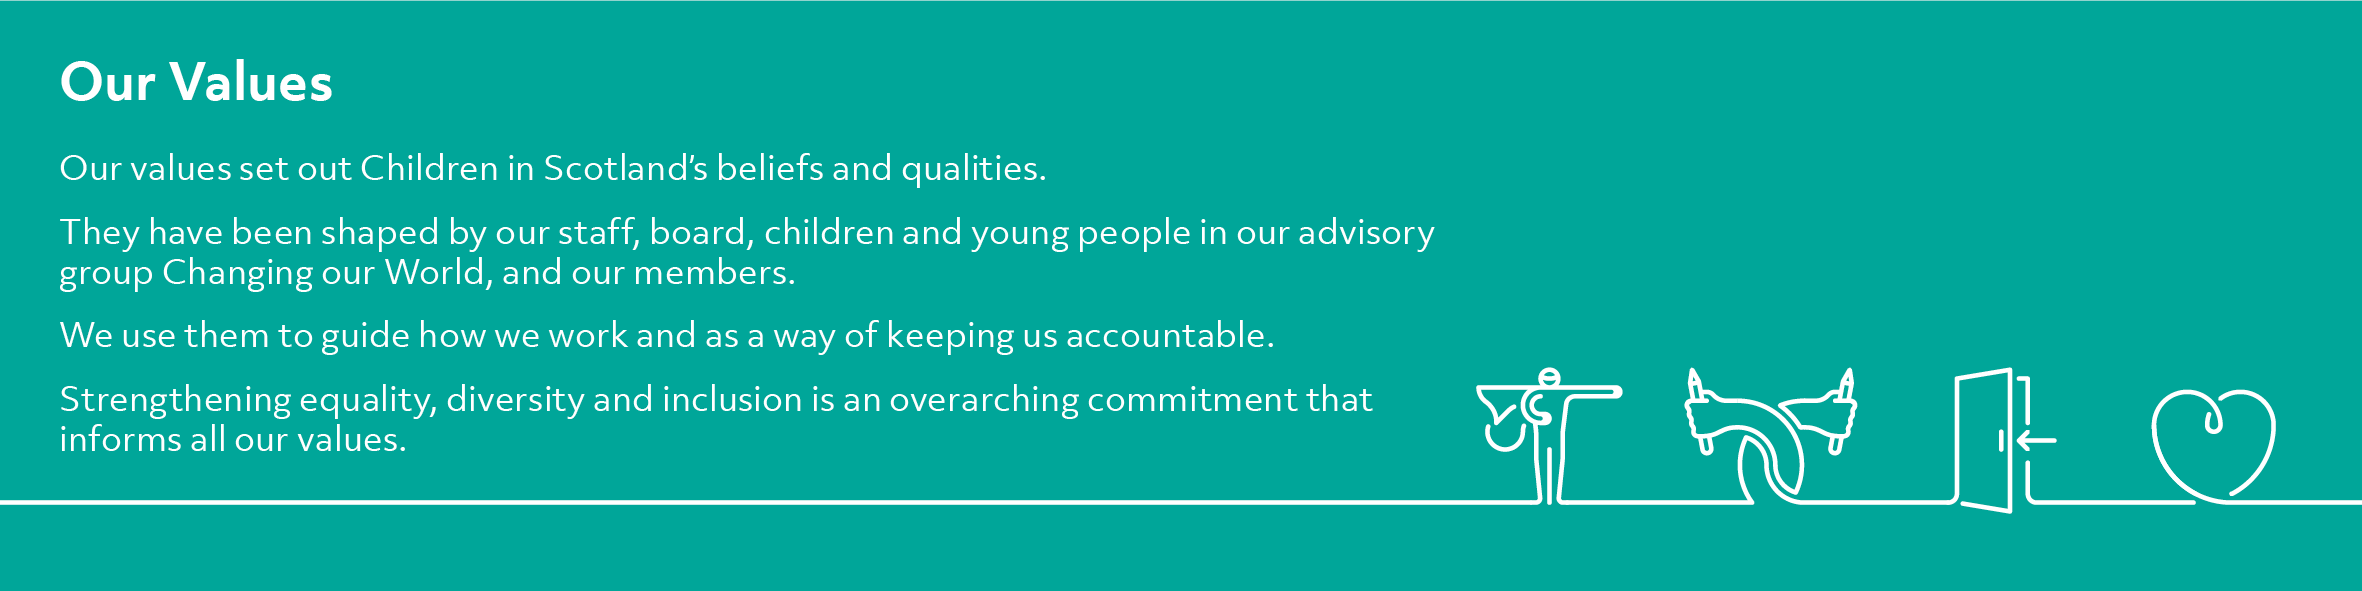 White text on green. The text reads 'Our values. Our values set out Children in Scotland's beliefs and qualities. They have been shaped by our staff, board, children and young people in our advisory group Changing our World and our members. We use them to guide how we work and as a way of keeping us accountable. Strengthening equality, diversity, and inclusion is an overarching commitment that informs all our values.'